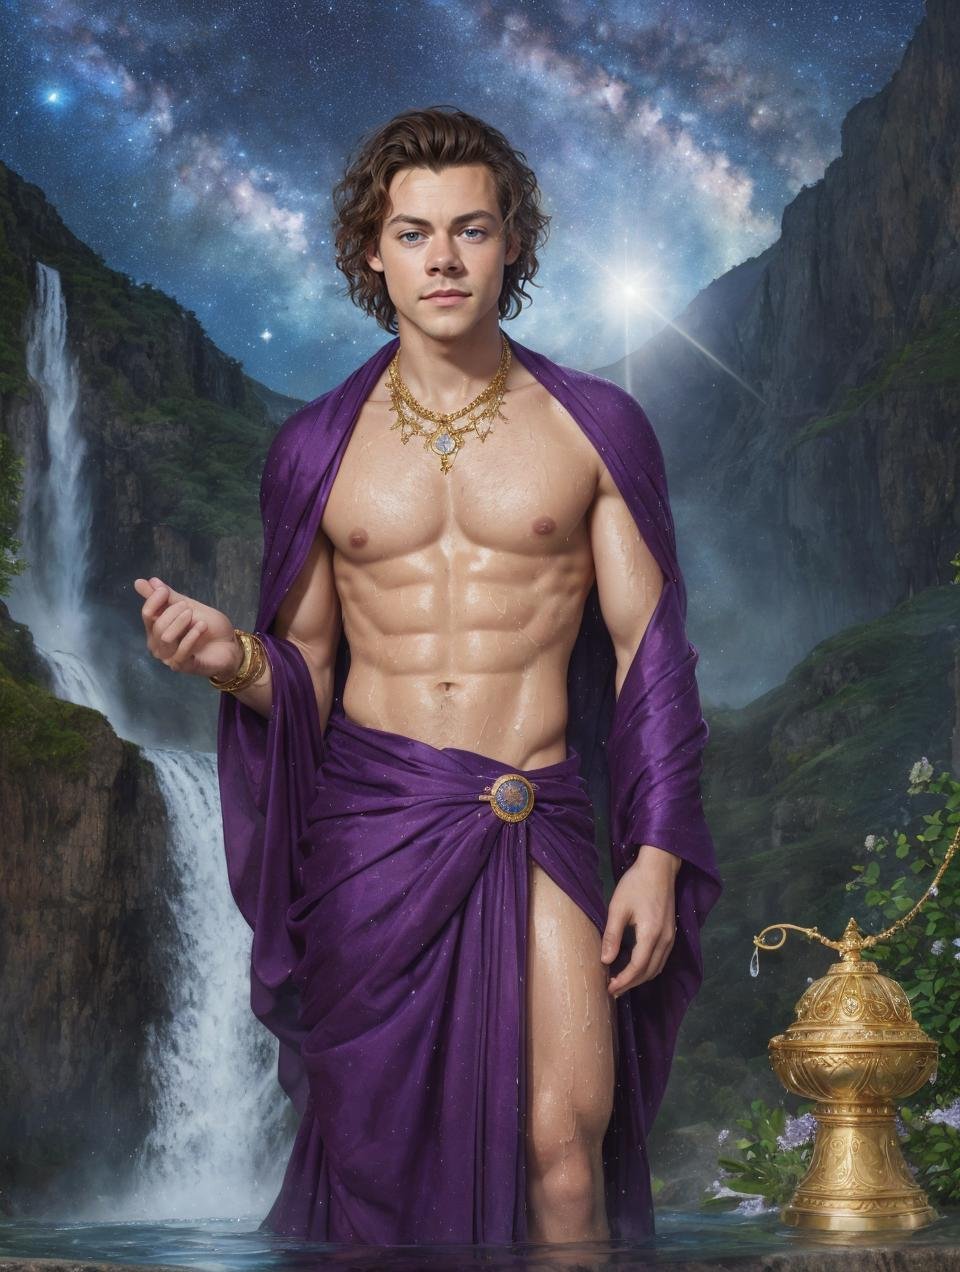 (GS-Masculine:1) (one male), Very detailed youthful face, heroic, detailed realistic open eyes, high quality, vibrant colors, photorealistic, masterpiece, Diffuse lighting, soft light, glistening skin, calm expression, suggestive, aquarius, harry styles, large bulge, wearing elegant robes, submerged, standing by a large basin of water, starry lit sky, galaxies swirling, a waterfall in the background, looking at viewer, constellations, golden jewelry, bangles, greek mythology, greek mythos, amethyst, water splashing , circlet, wet skin